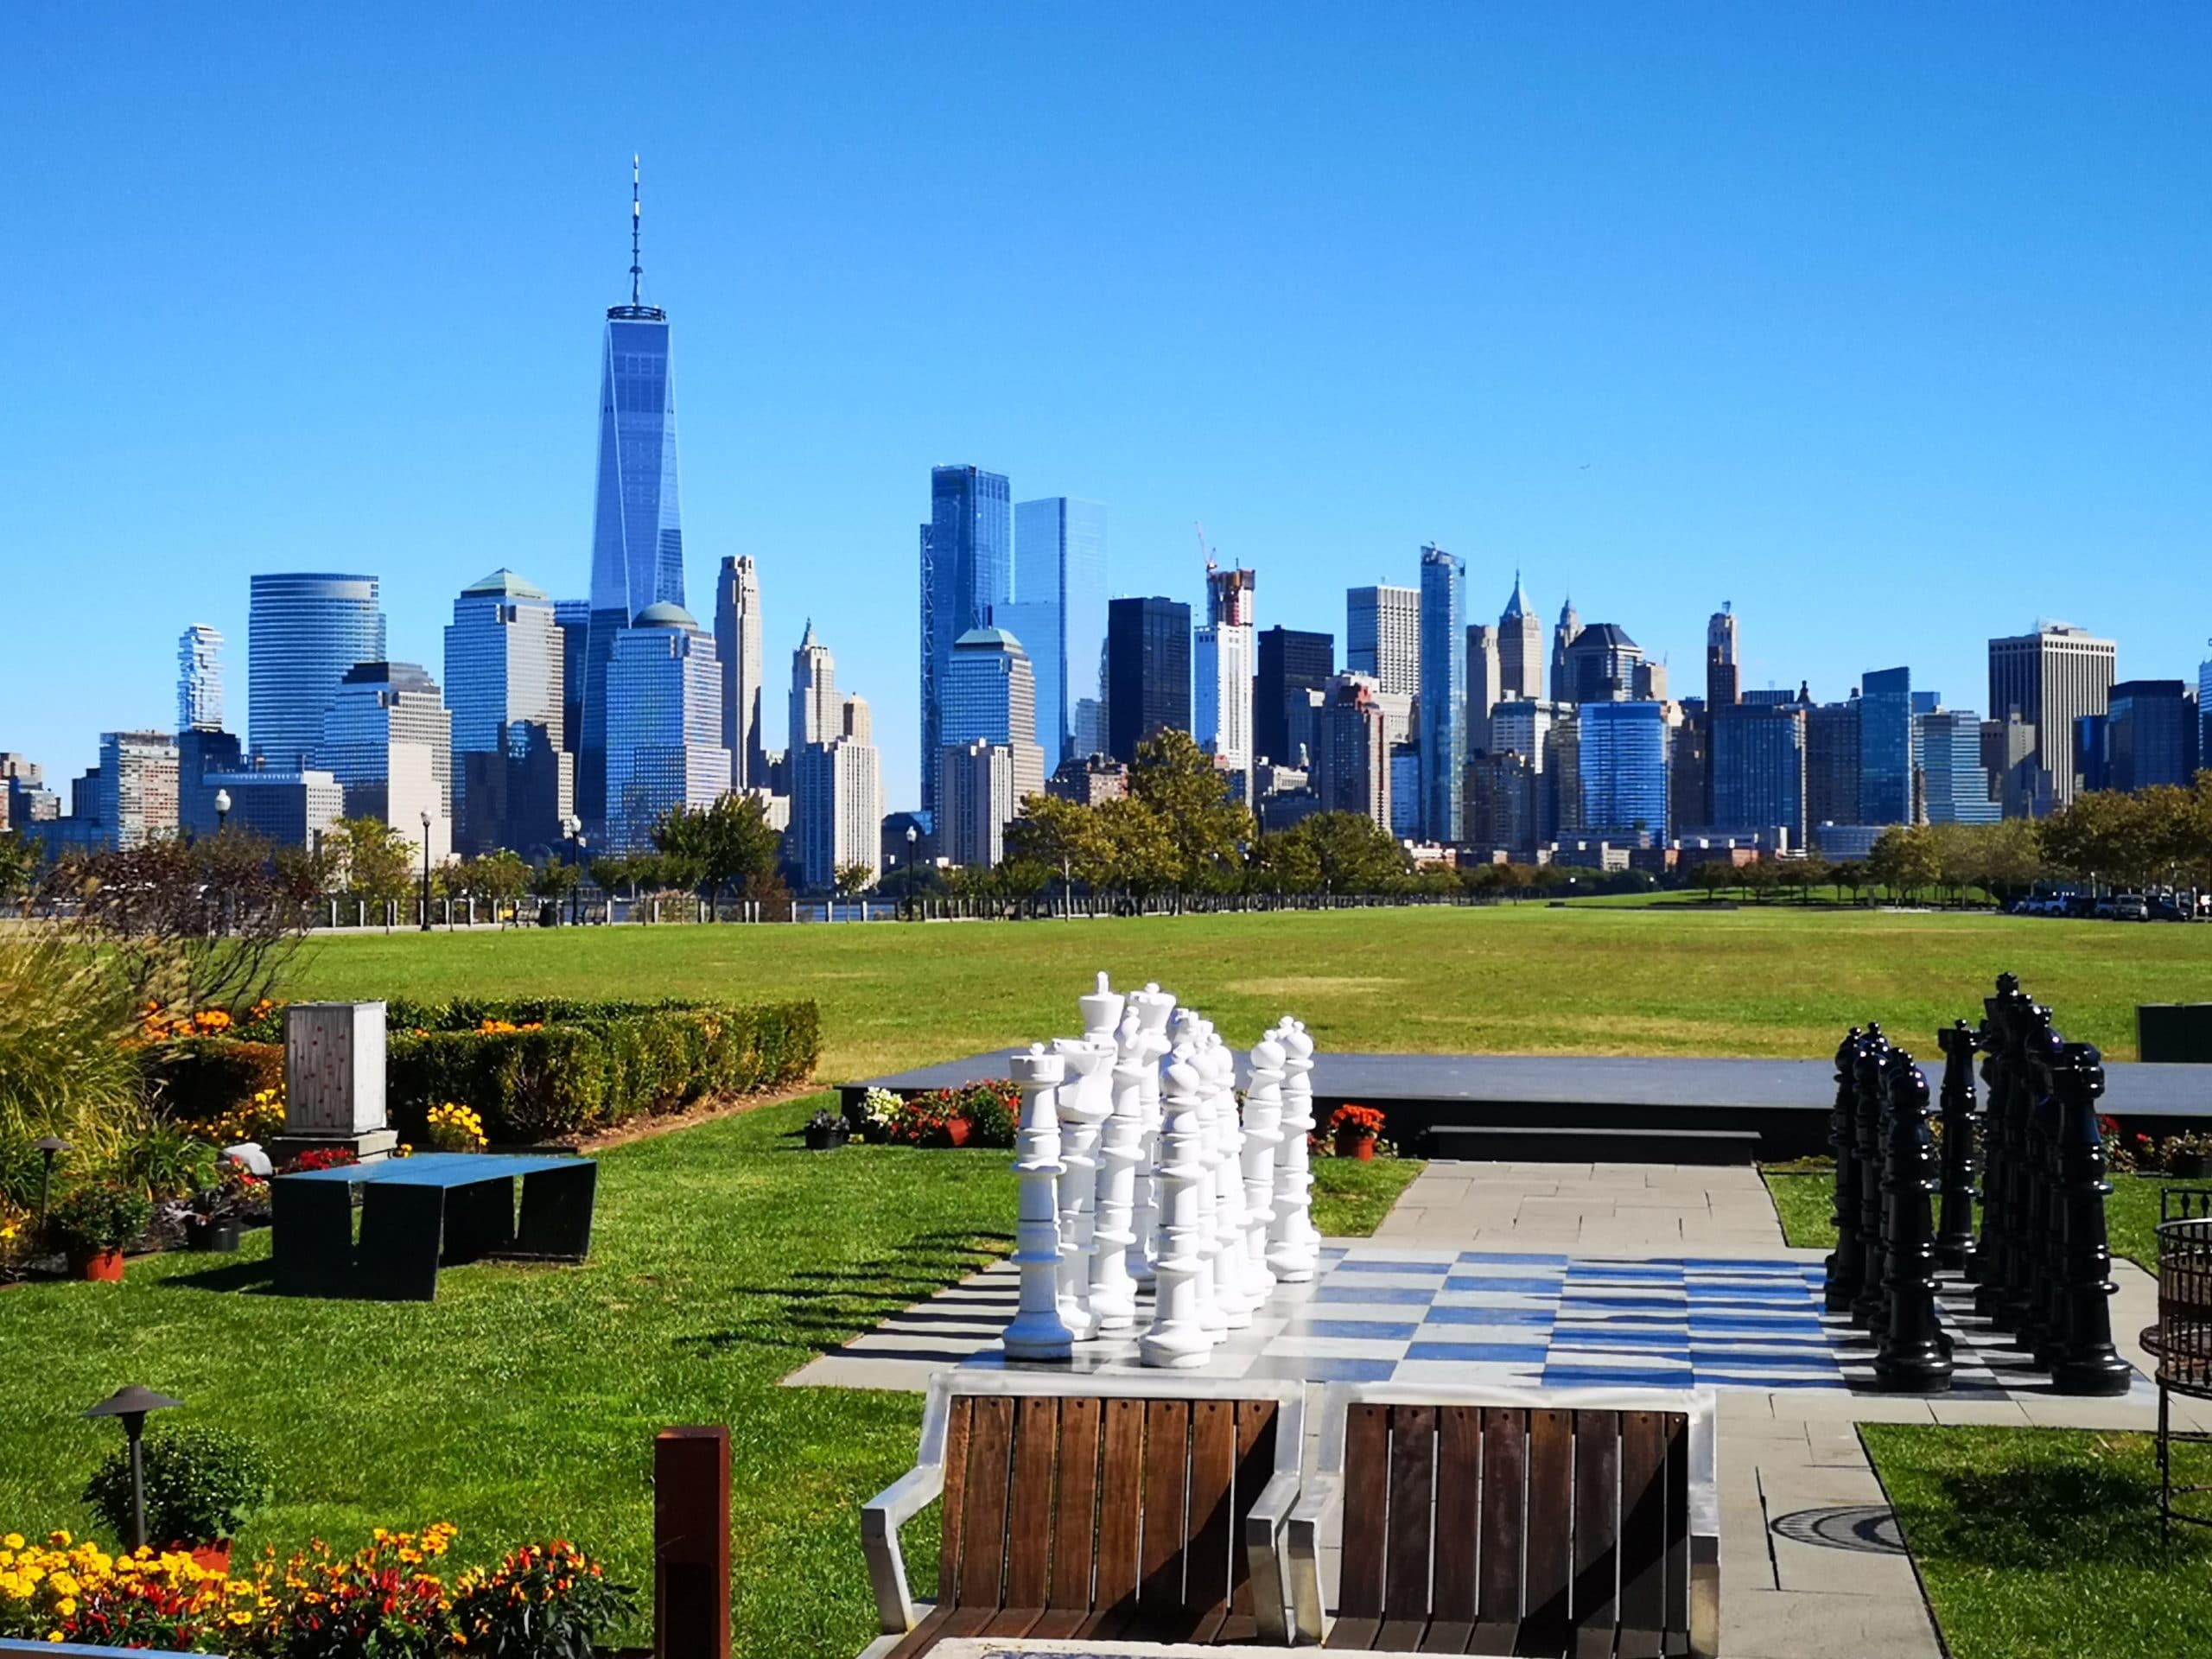 Image of New Jersey skyline with park and large chess board in the foreground